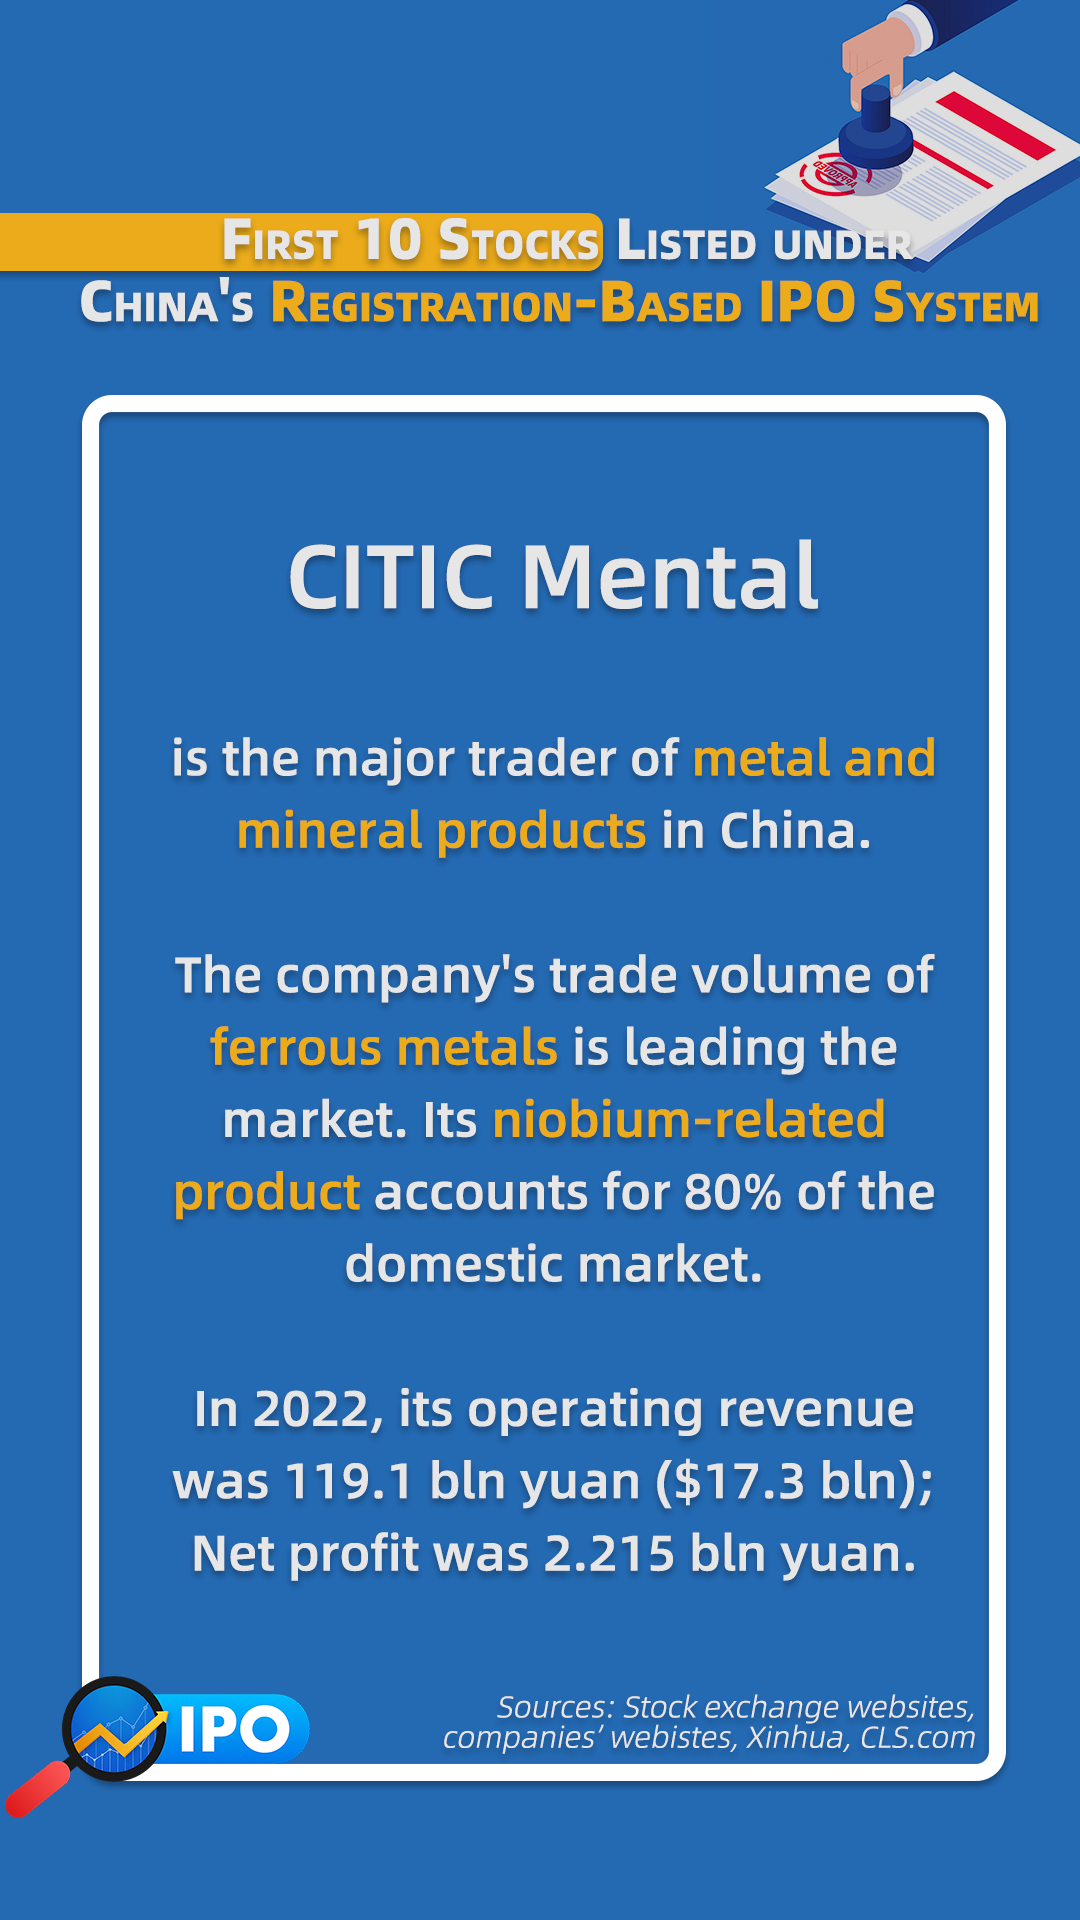 CITIC Mental, one of the 10 listed companies